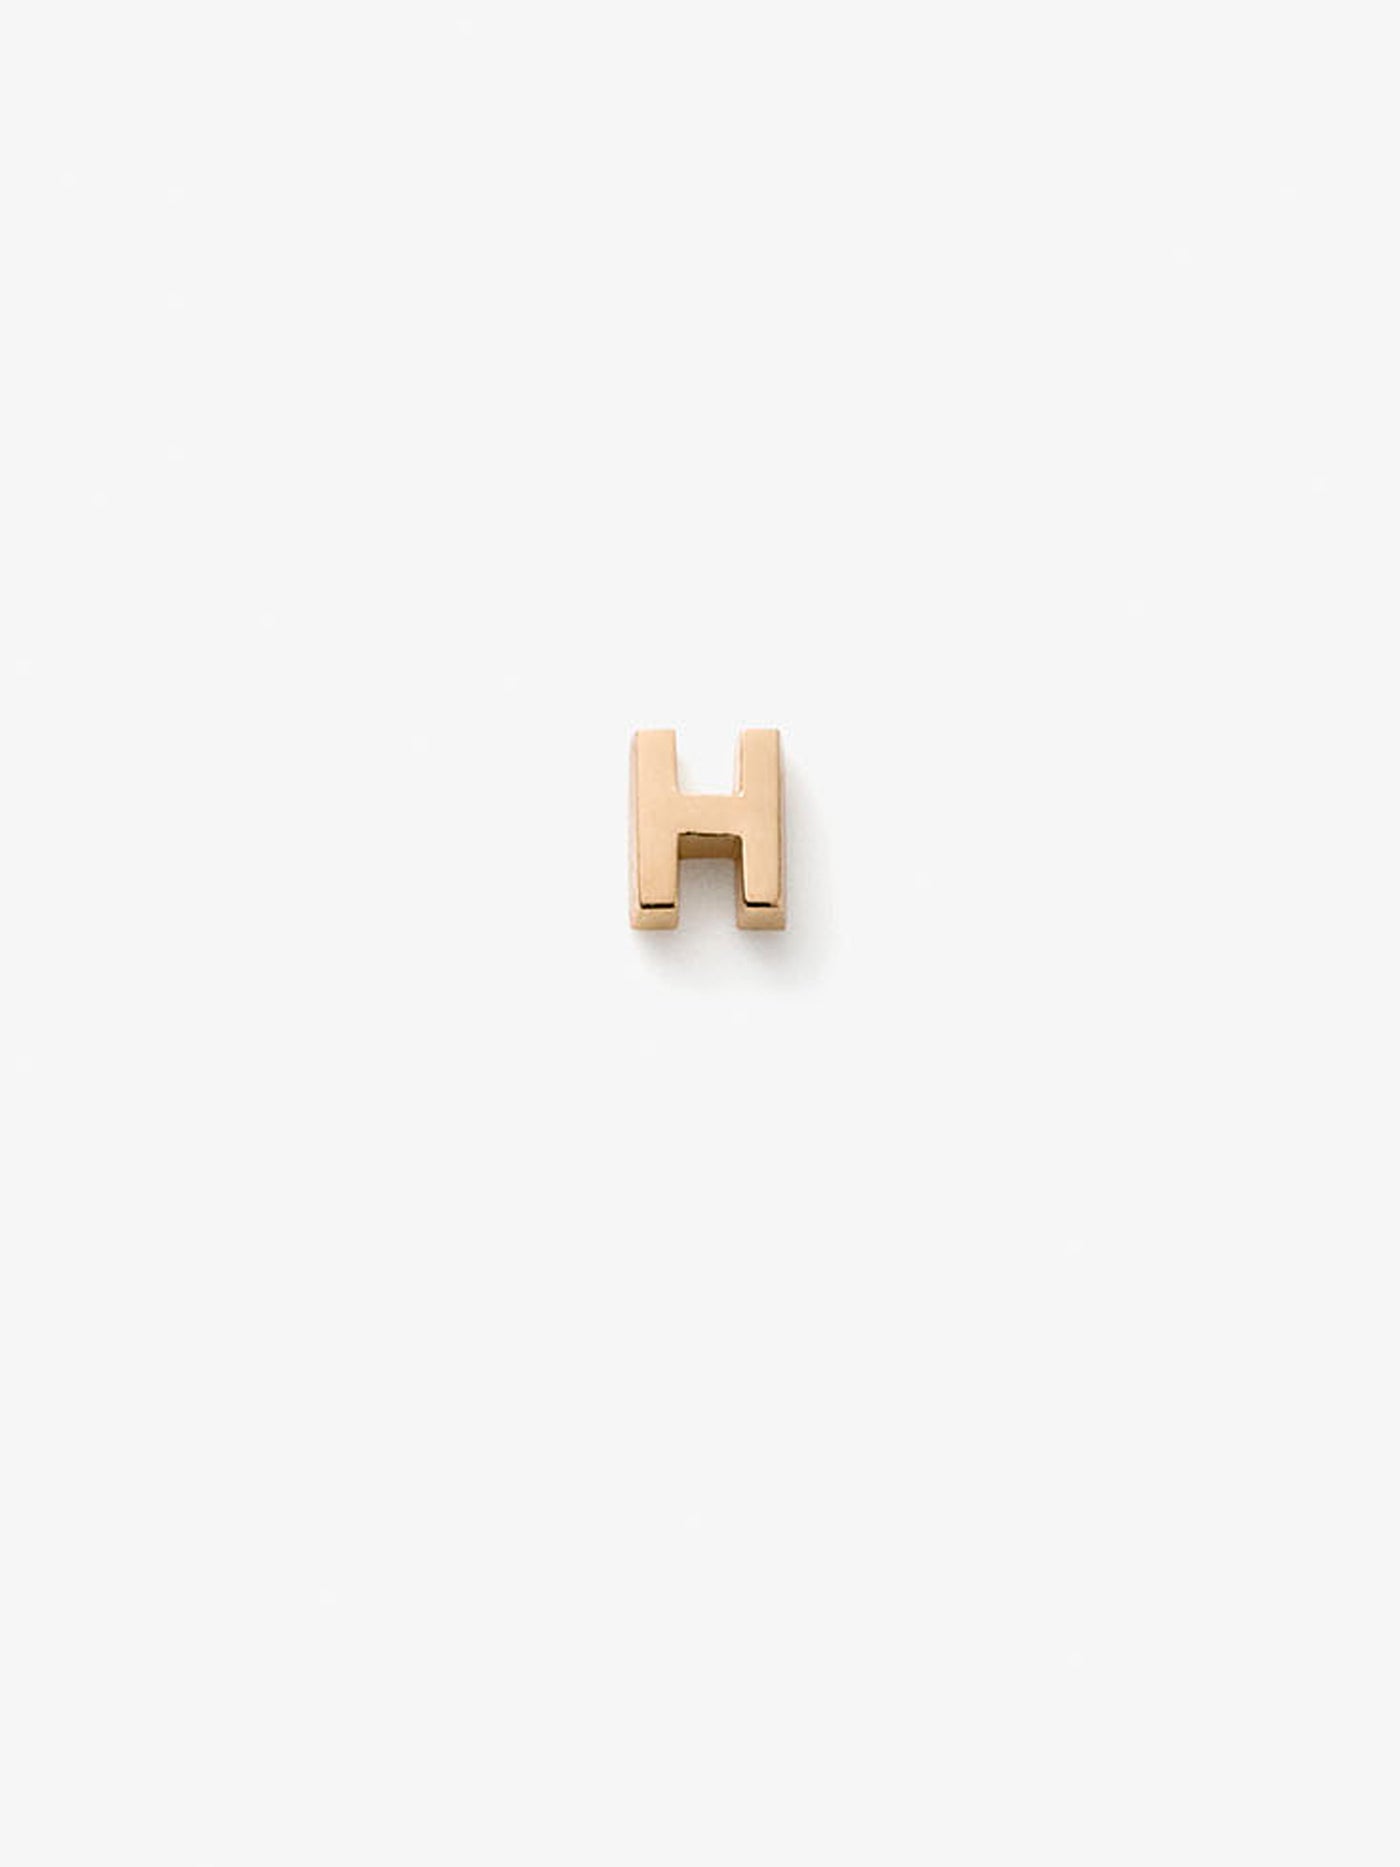 One Letter H in 18k Gold